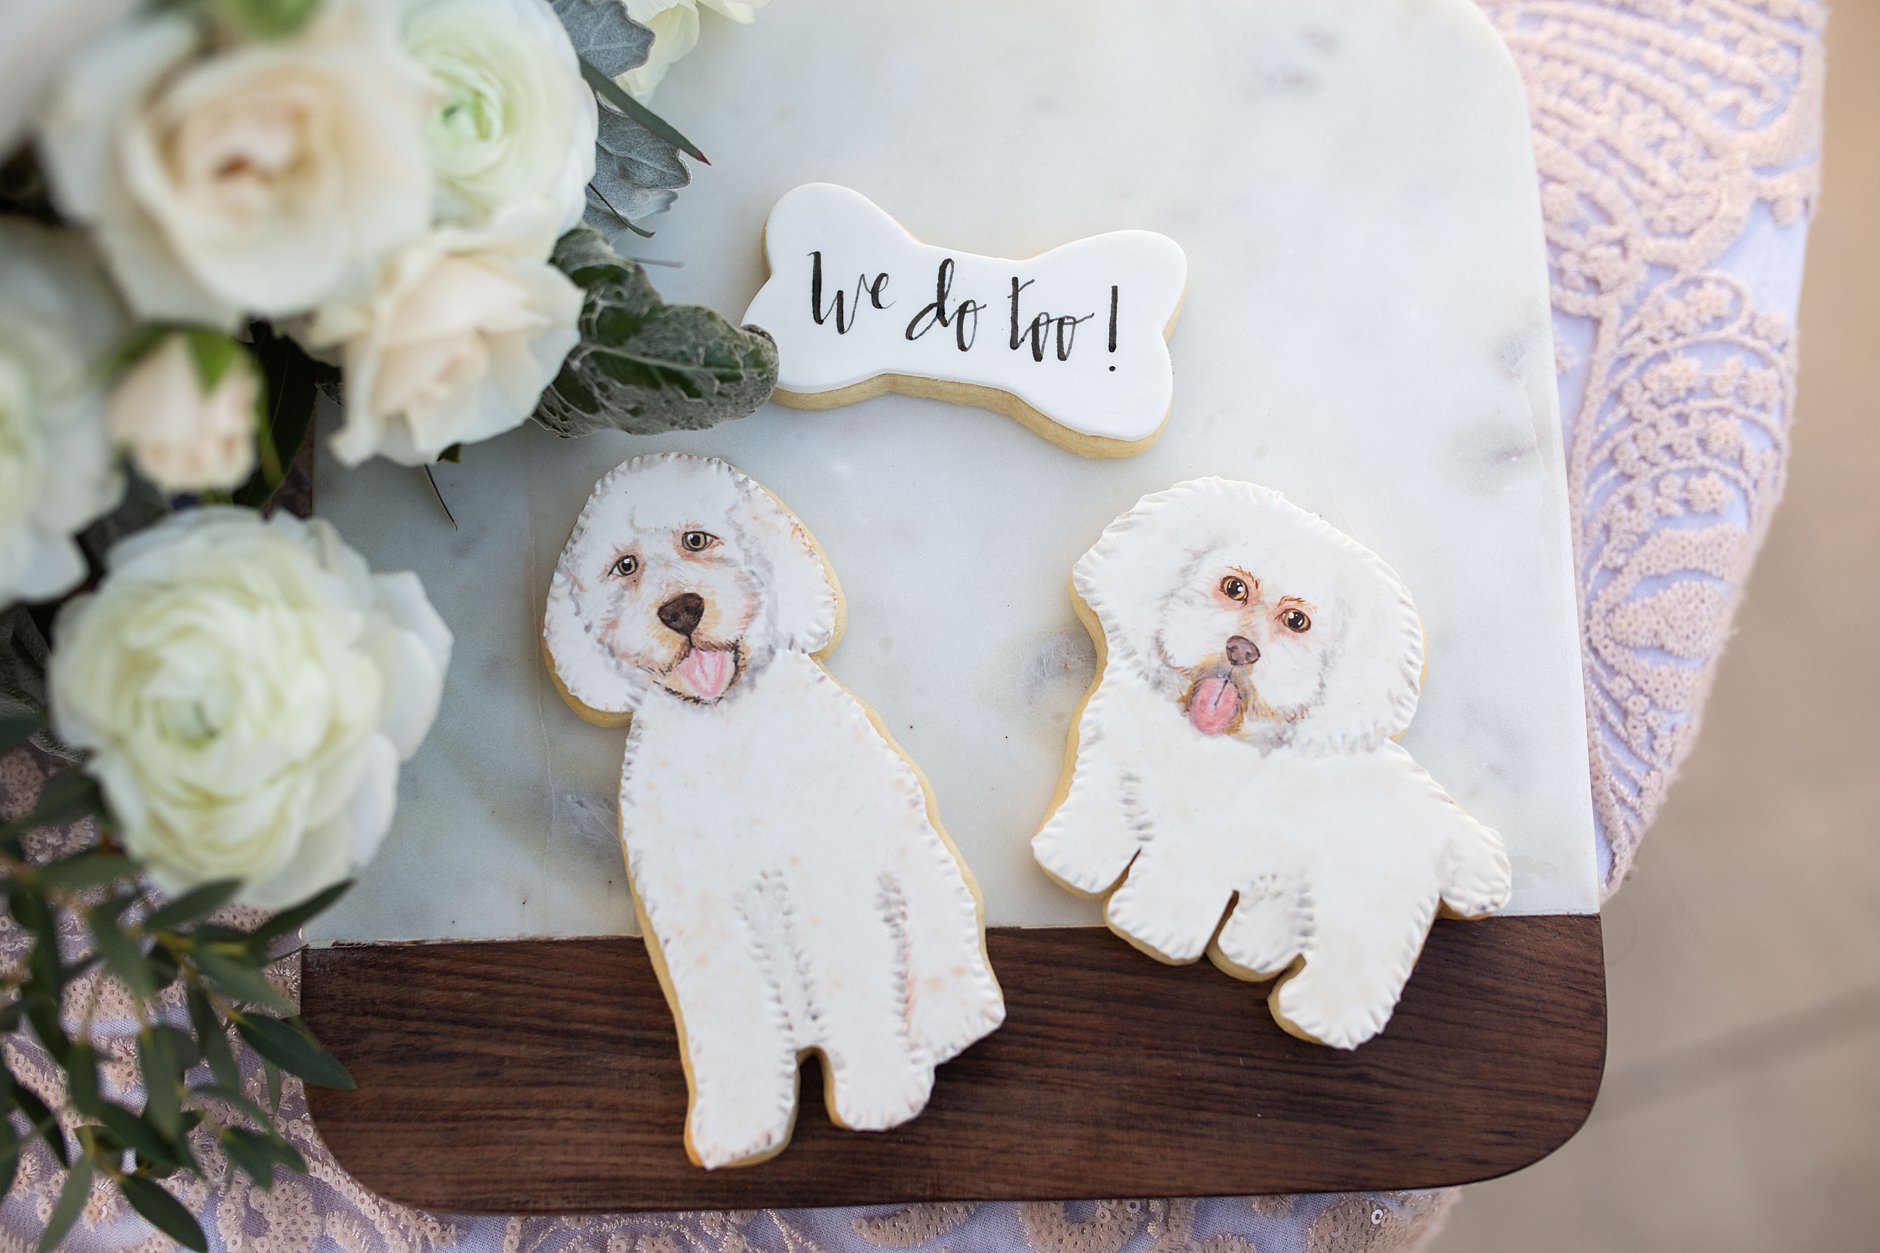 Wedding cake and cookies of the dogs. We do too cookies.